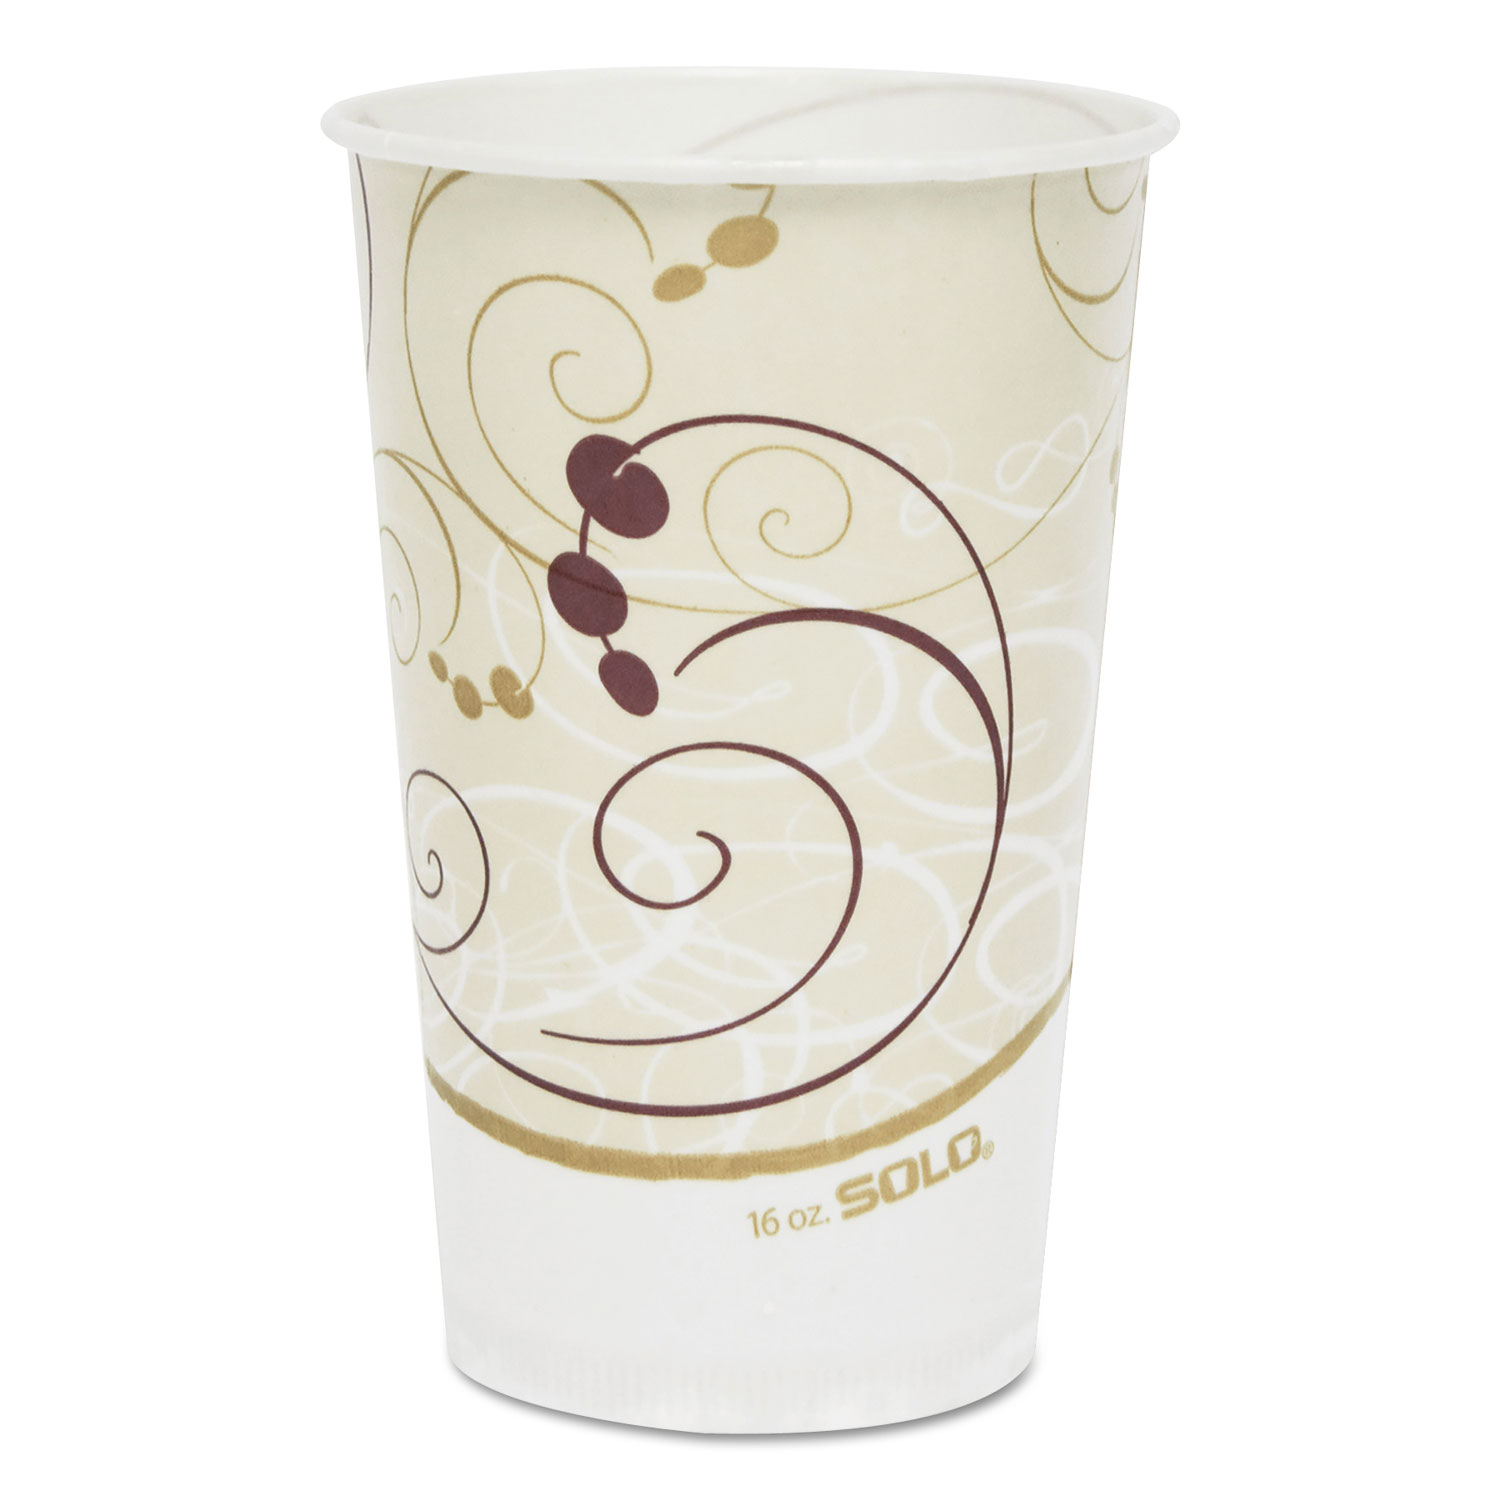  Dart RW16-J8000 Symphony Treated-Paper Cold Cups, 16oz, White/Beige/Red, 50/Bag, 20 Bags/Carton (SCCRW16SYM) 